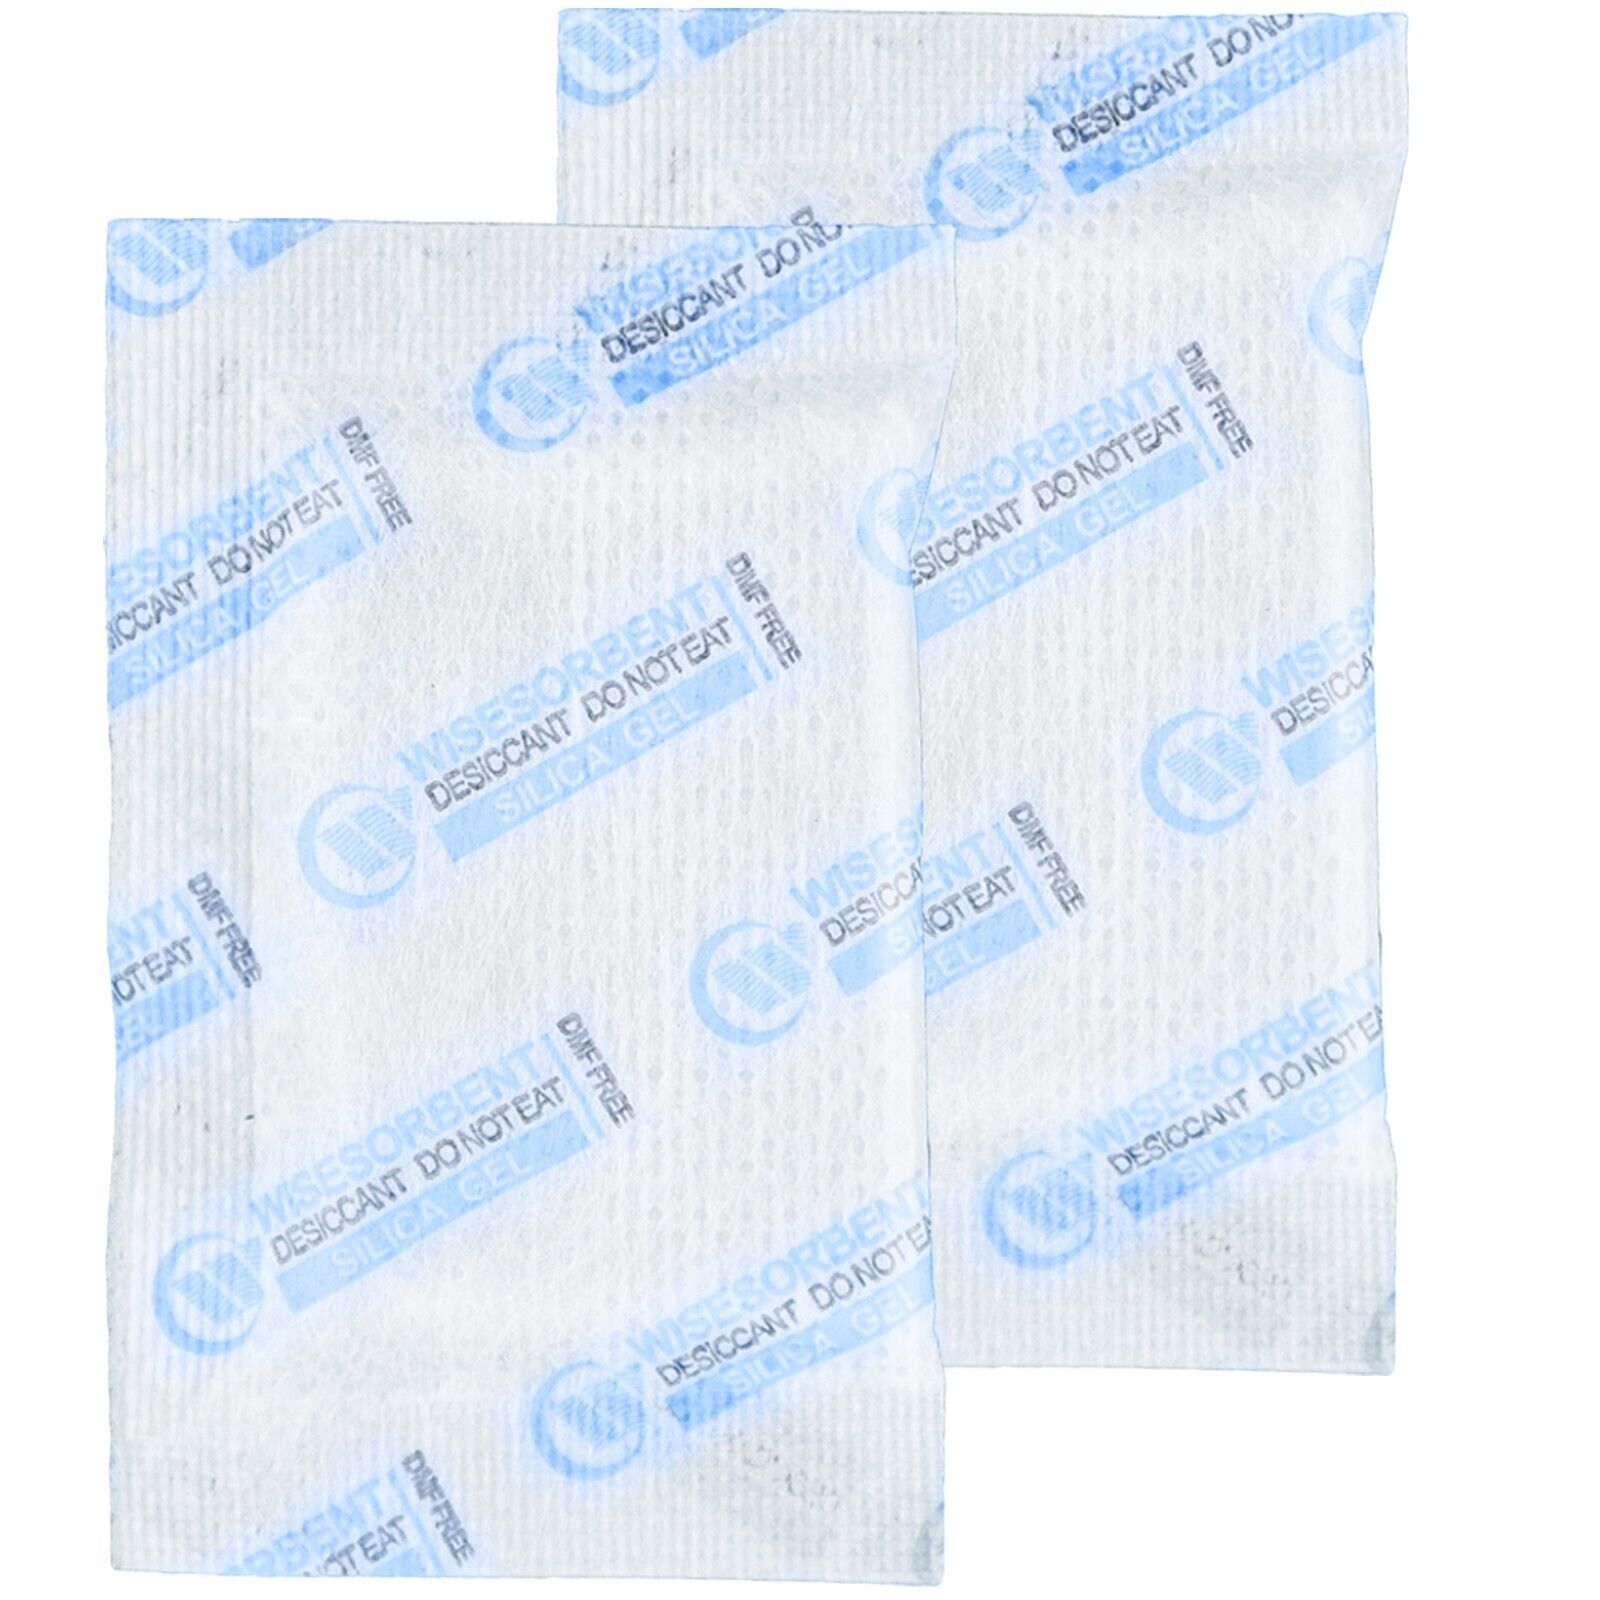 5g, 60pcs Silica Gel Packs, Verna Non-Woven Packed White Silica Gel Packets